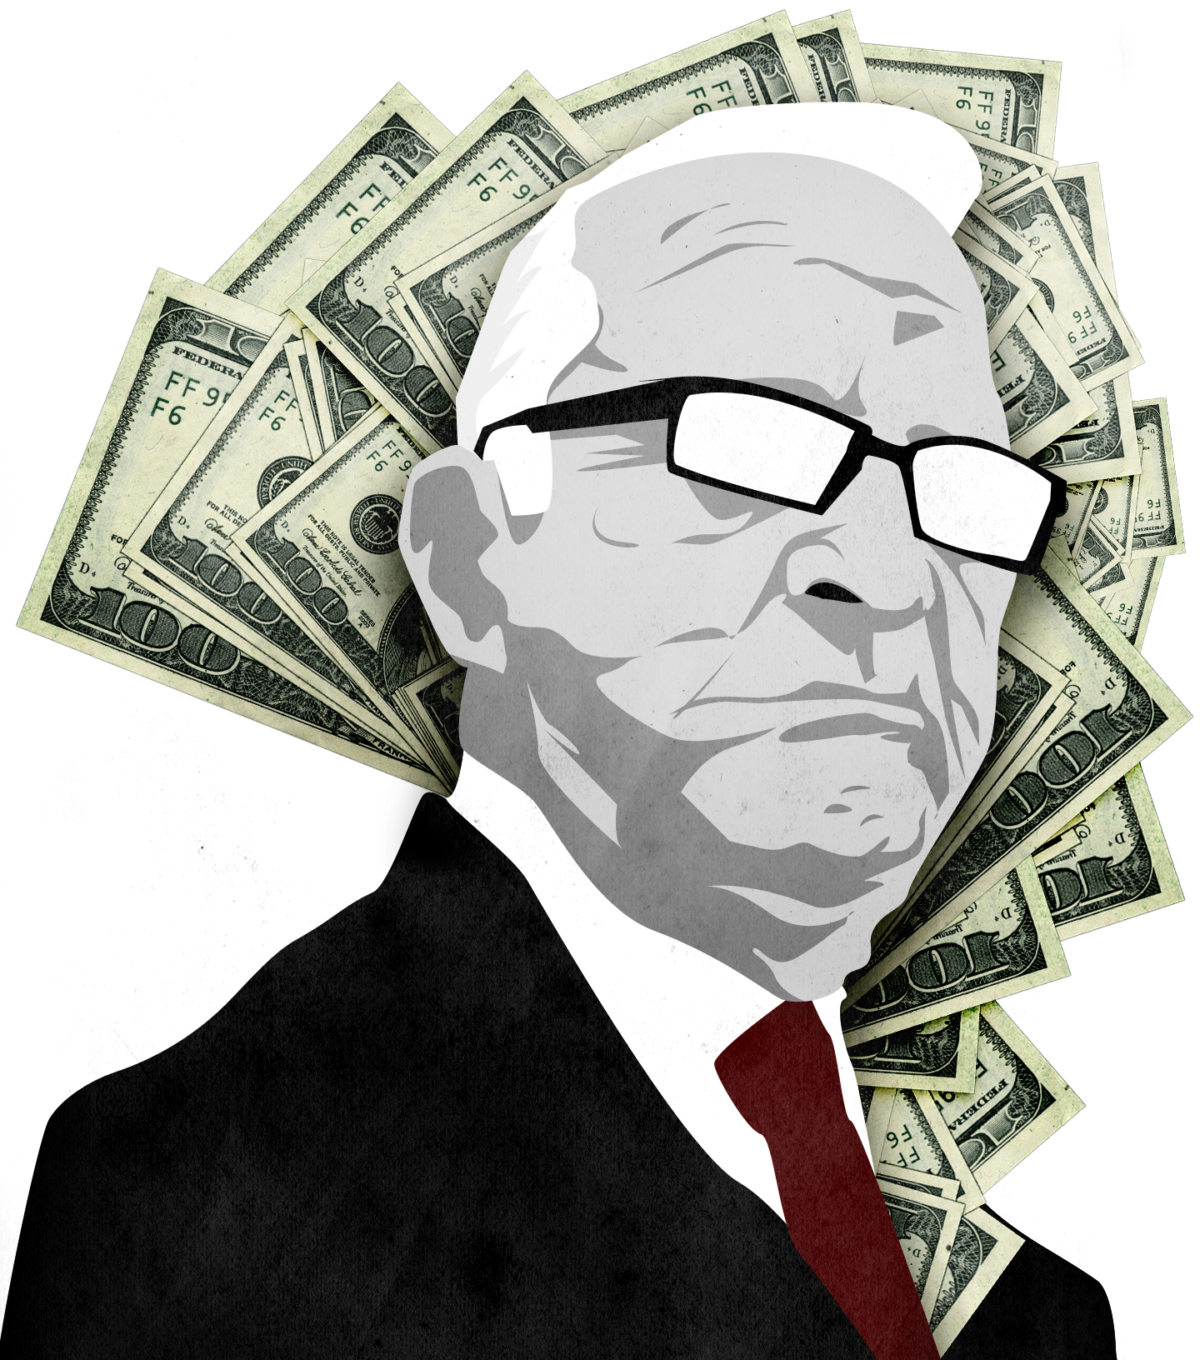 The Blatant Self-Dealing of Chairman McKeon